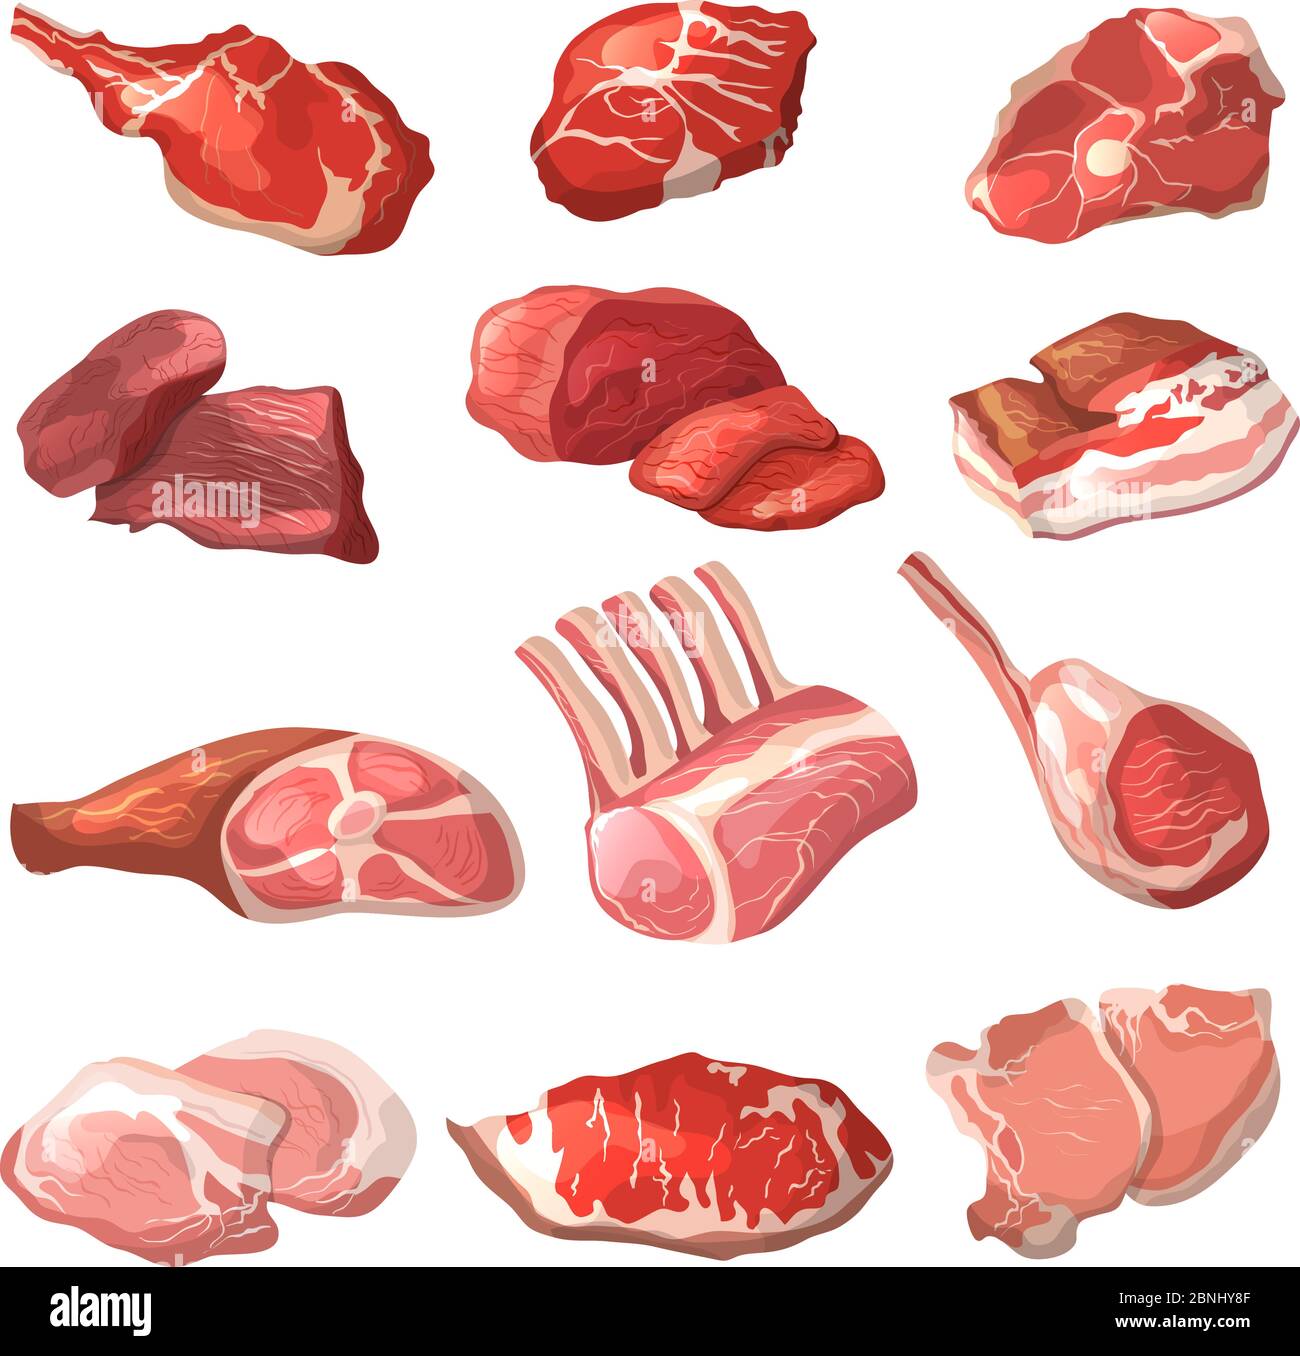 Lamb, pork beef, and other meat pictures in cartoon style Stock Vector